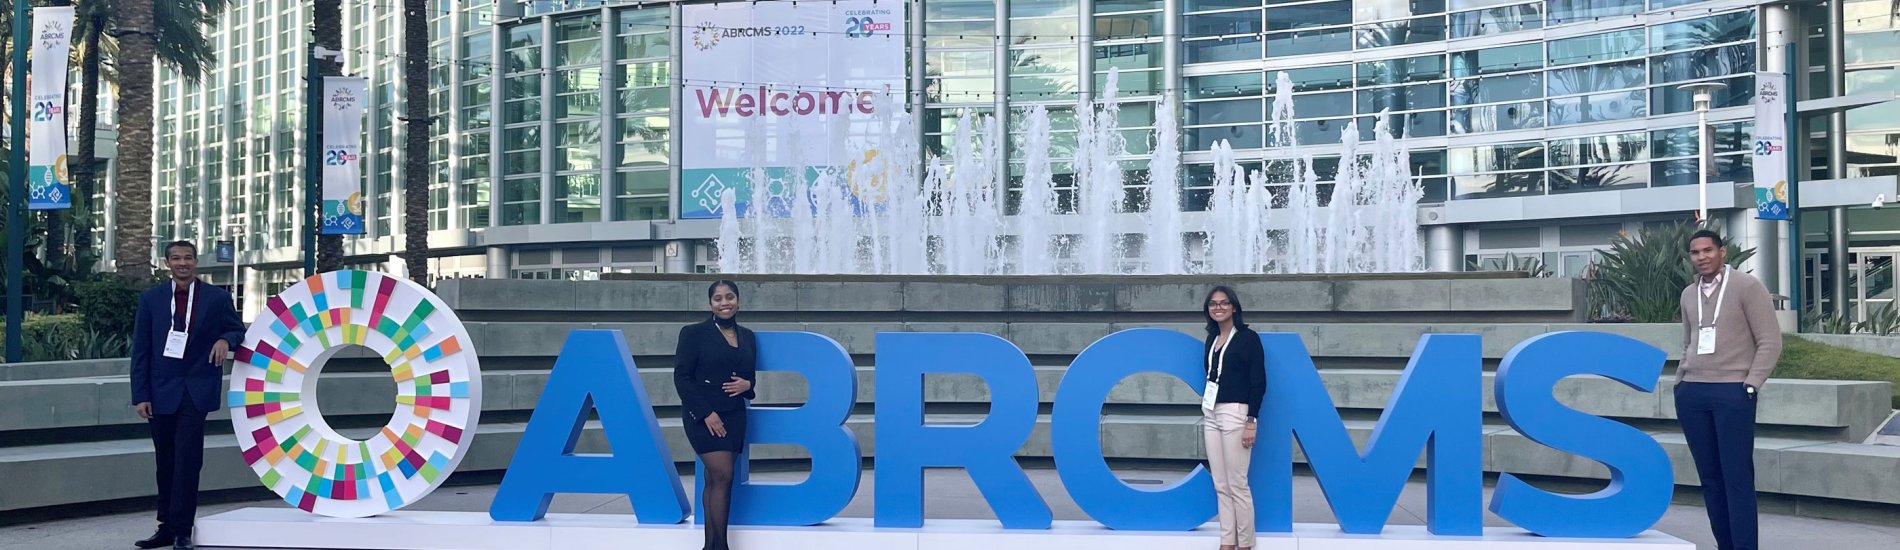 Four students in business casual clothing pose with the Annual Biomedical Conference for Minority Students (ABRCMS) logo